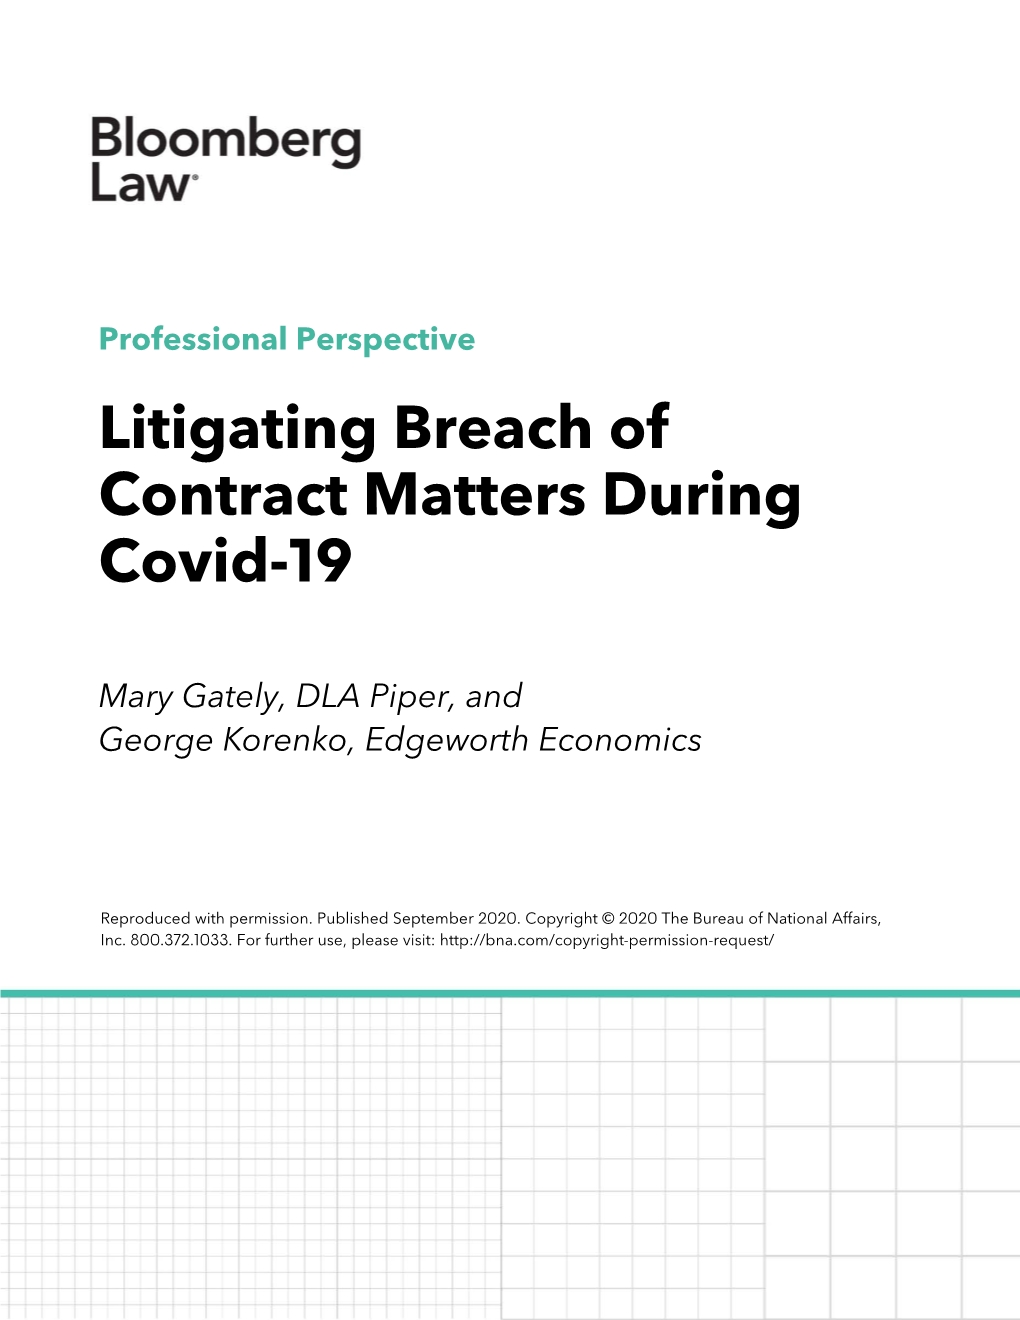 Litigating Breach of Contract Matters During Covid-19